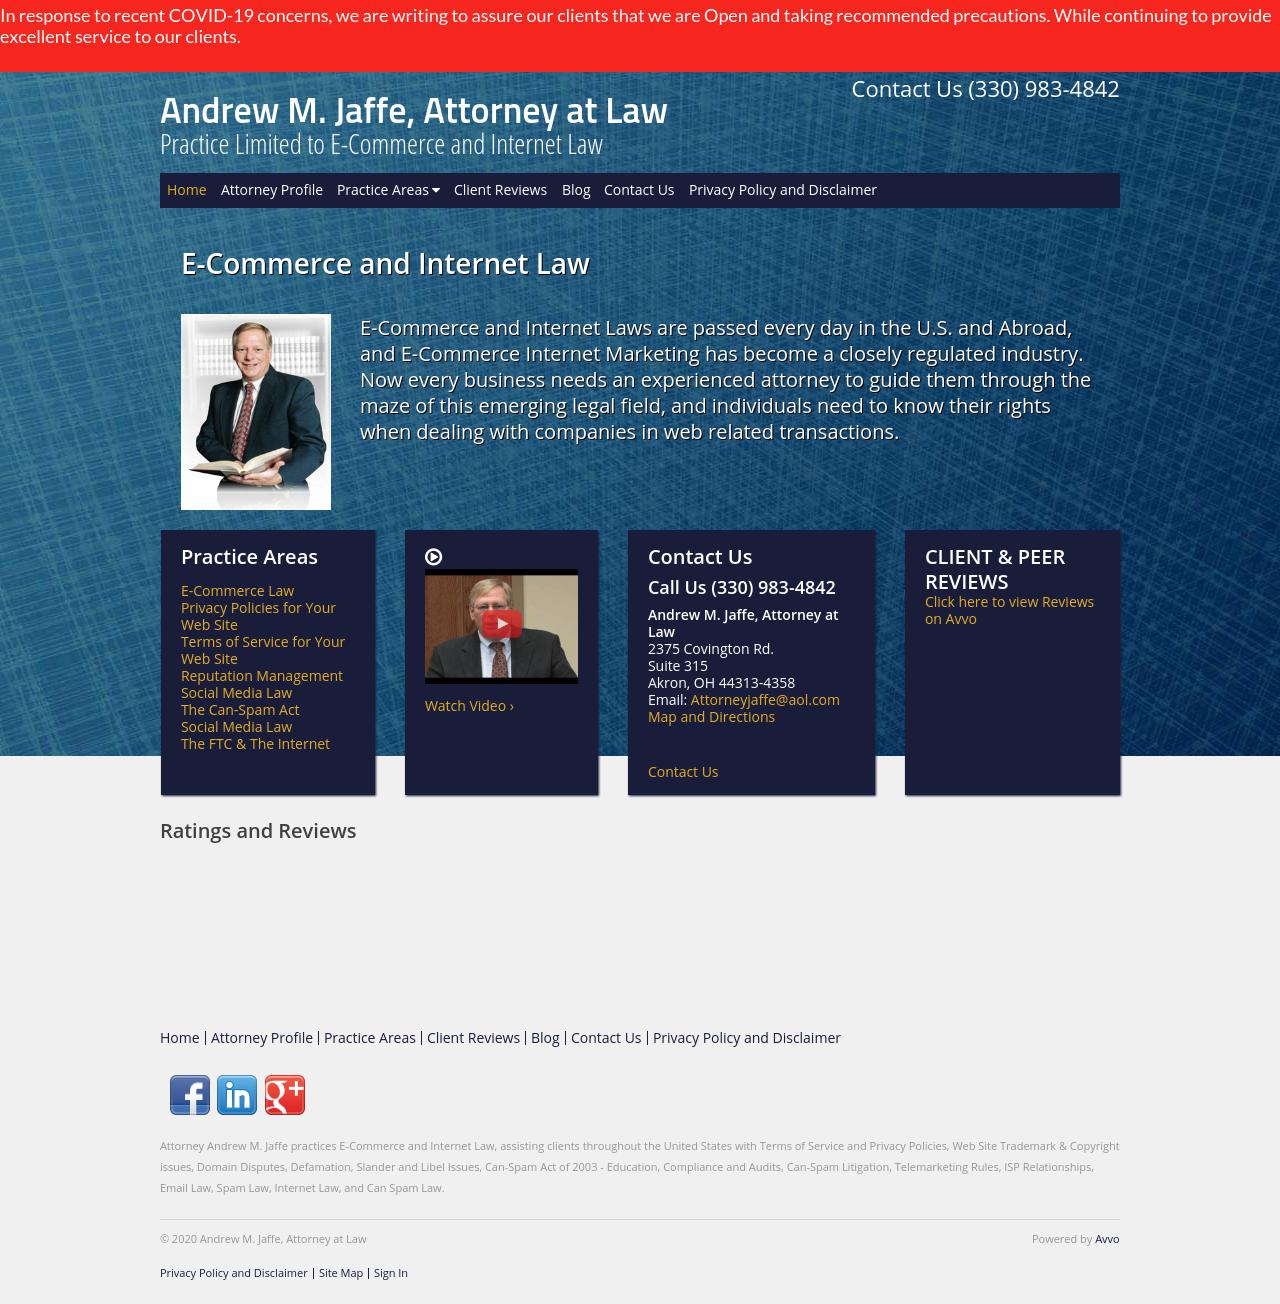 Andrew M. Jaffe, Attorney at Law - Fairlawn OH Lawyers